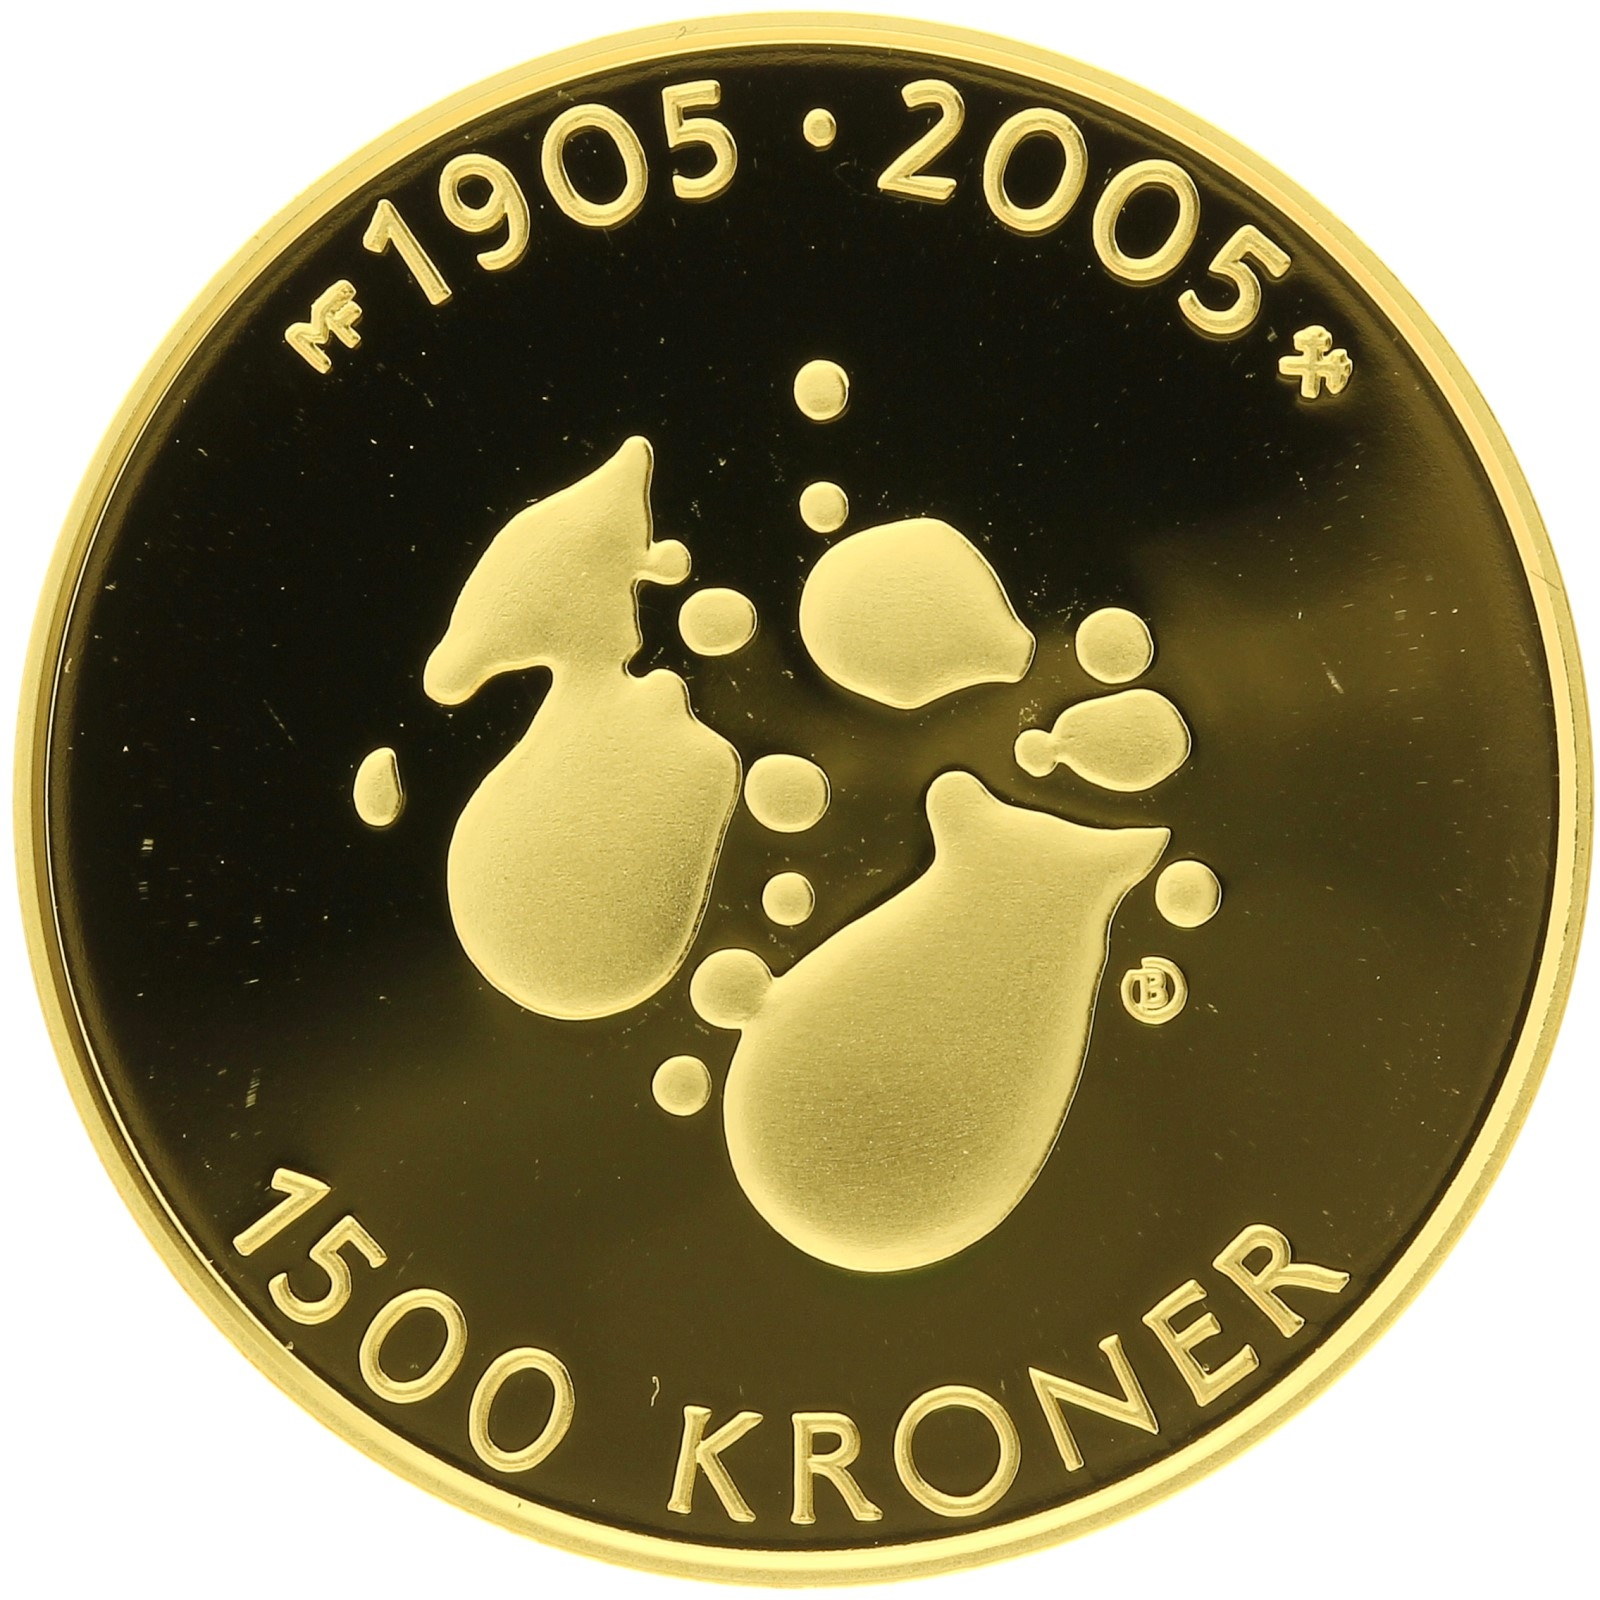 Norway - 1500 Kroner - 2004 - Harald V Dissolution of the Union - 1/2oz